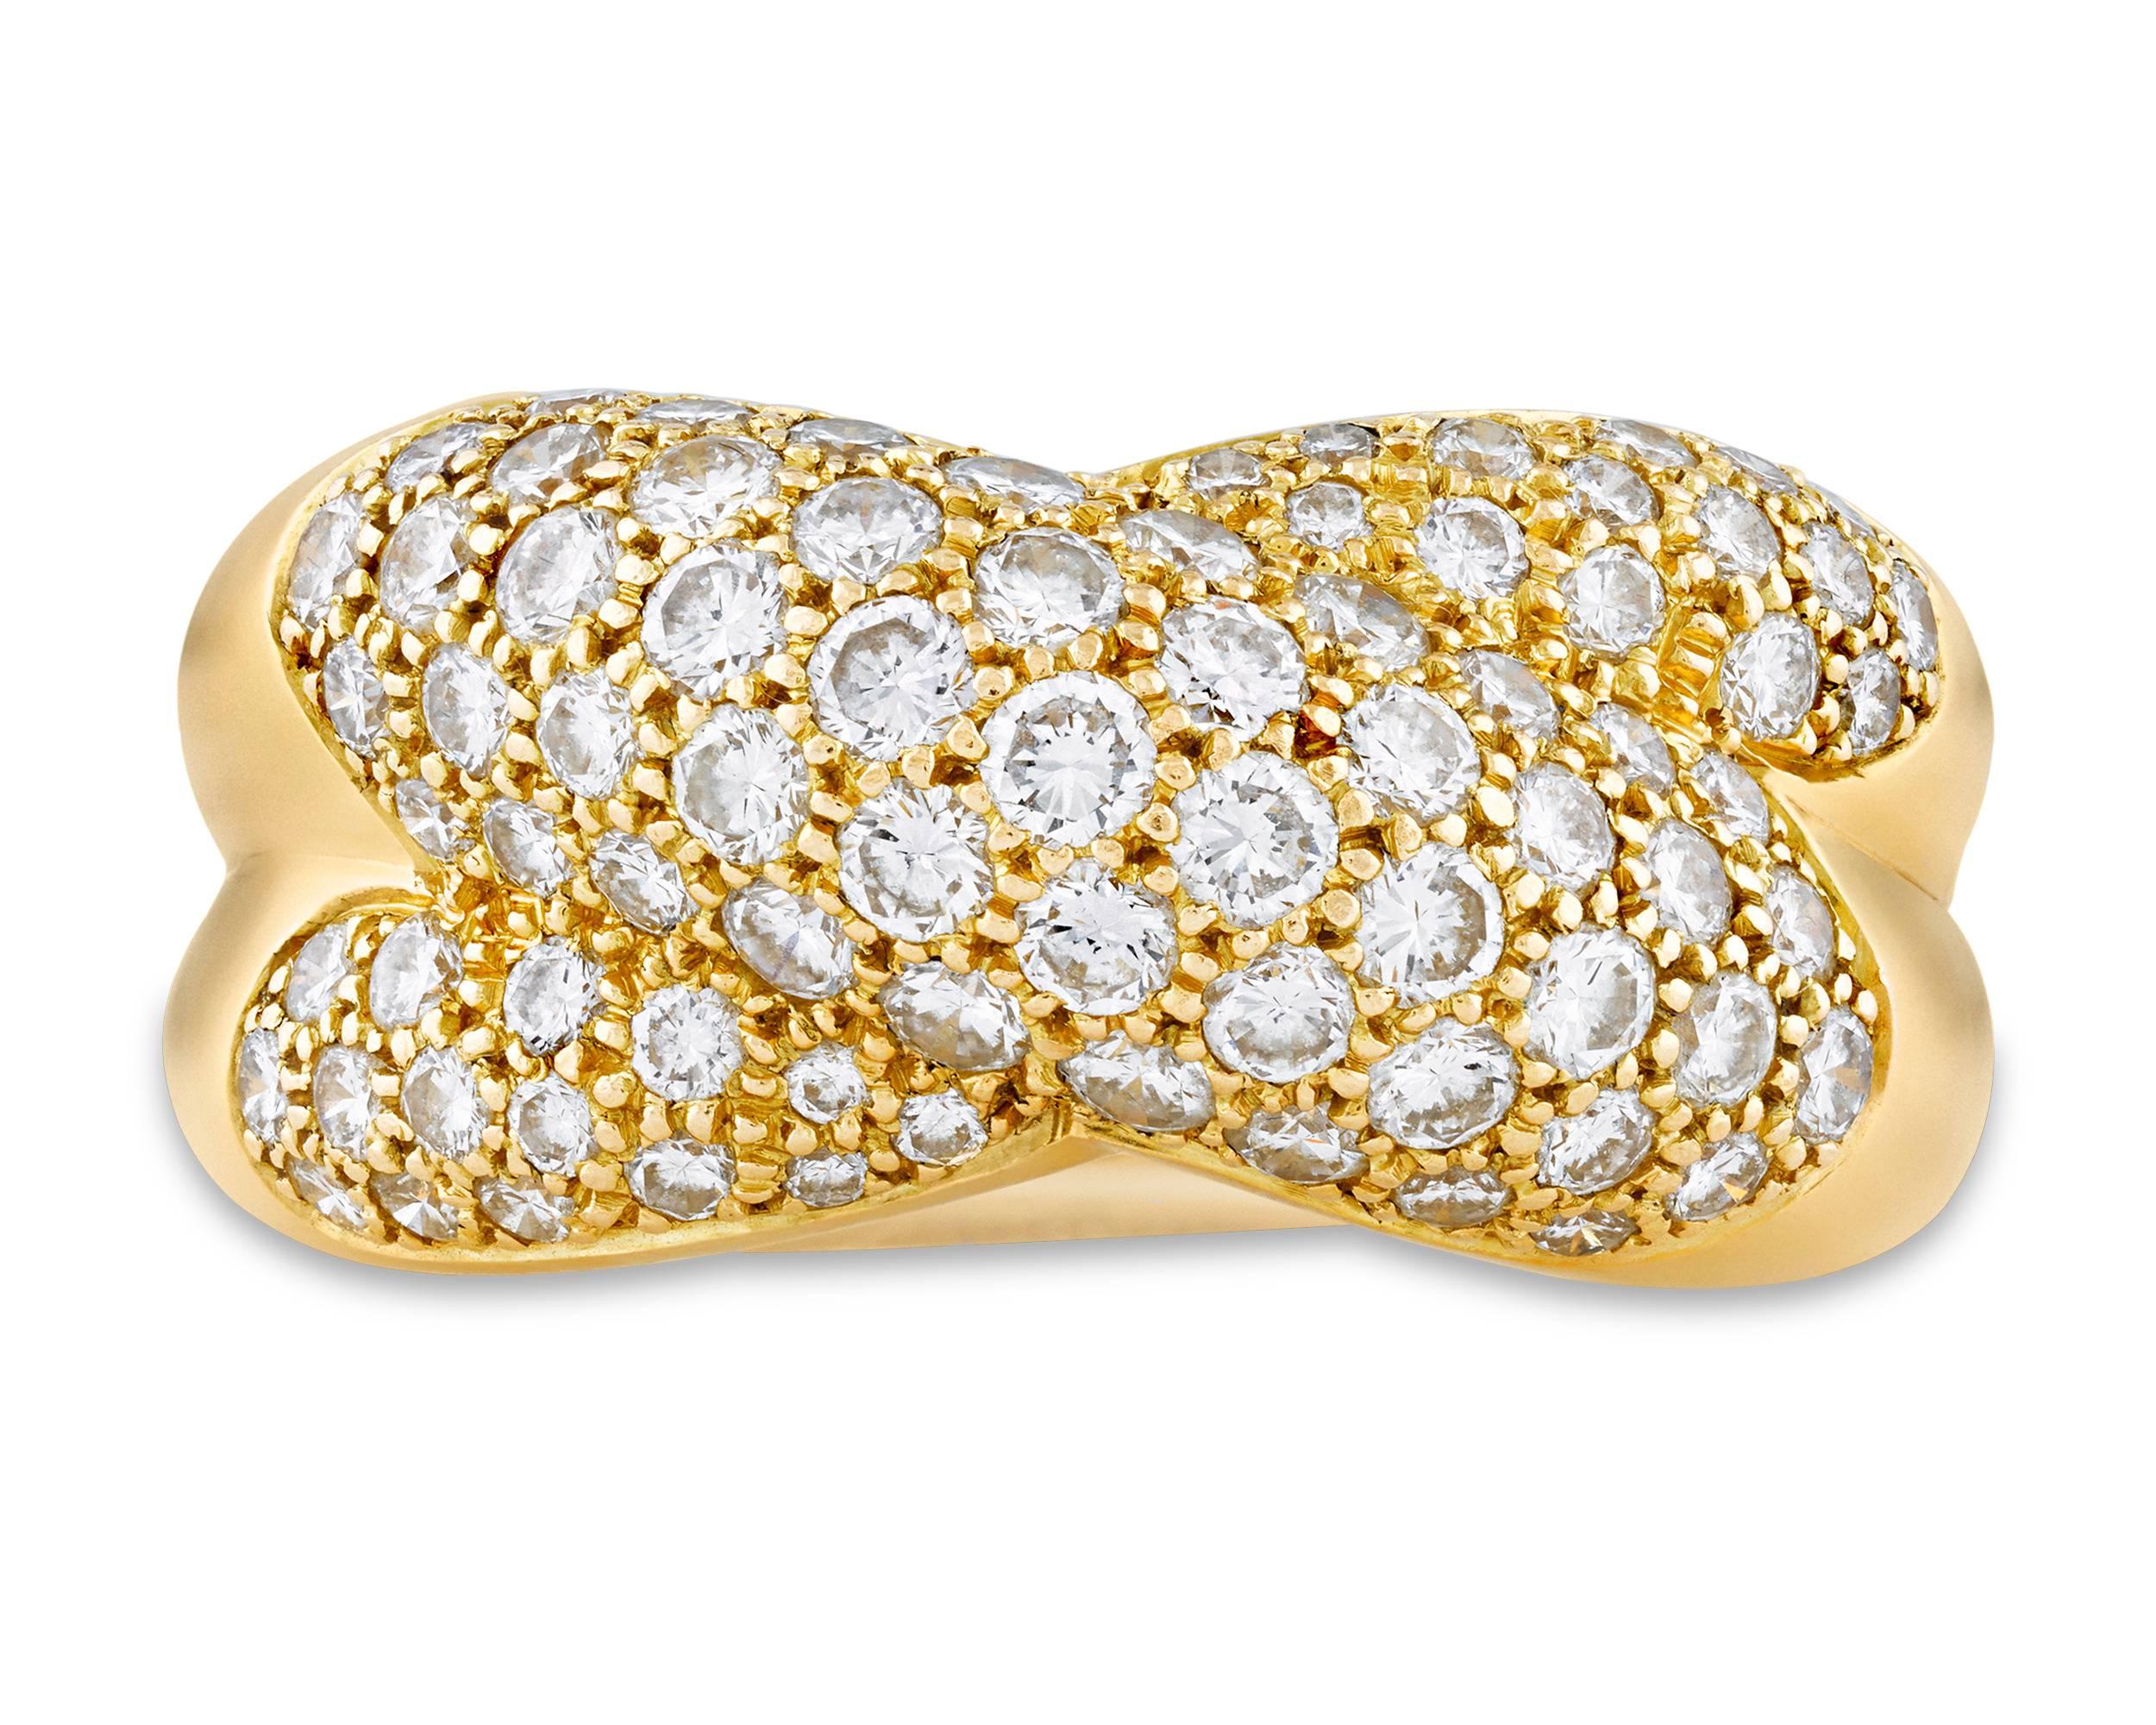 This classic crossover ring by the legendary Cartier is set with approximately 1.50 carats of white diamonds. The dynamic design is crafted of 18K yellow gold.

Marked 